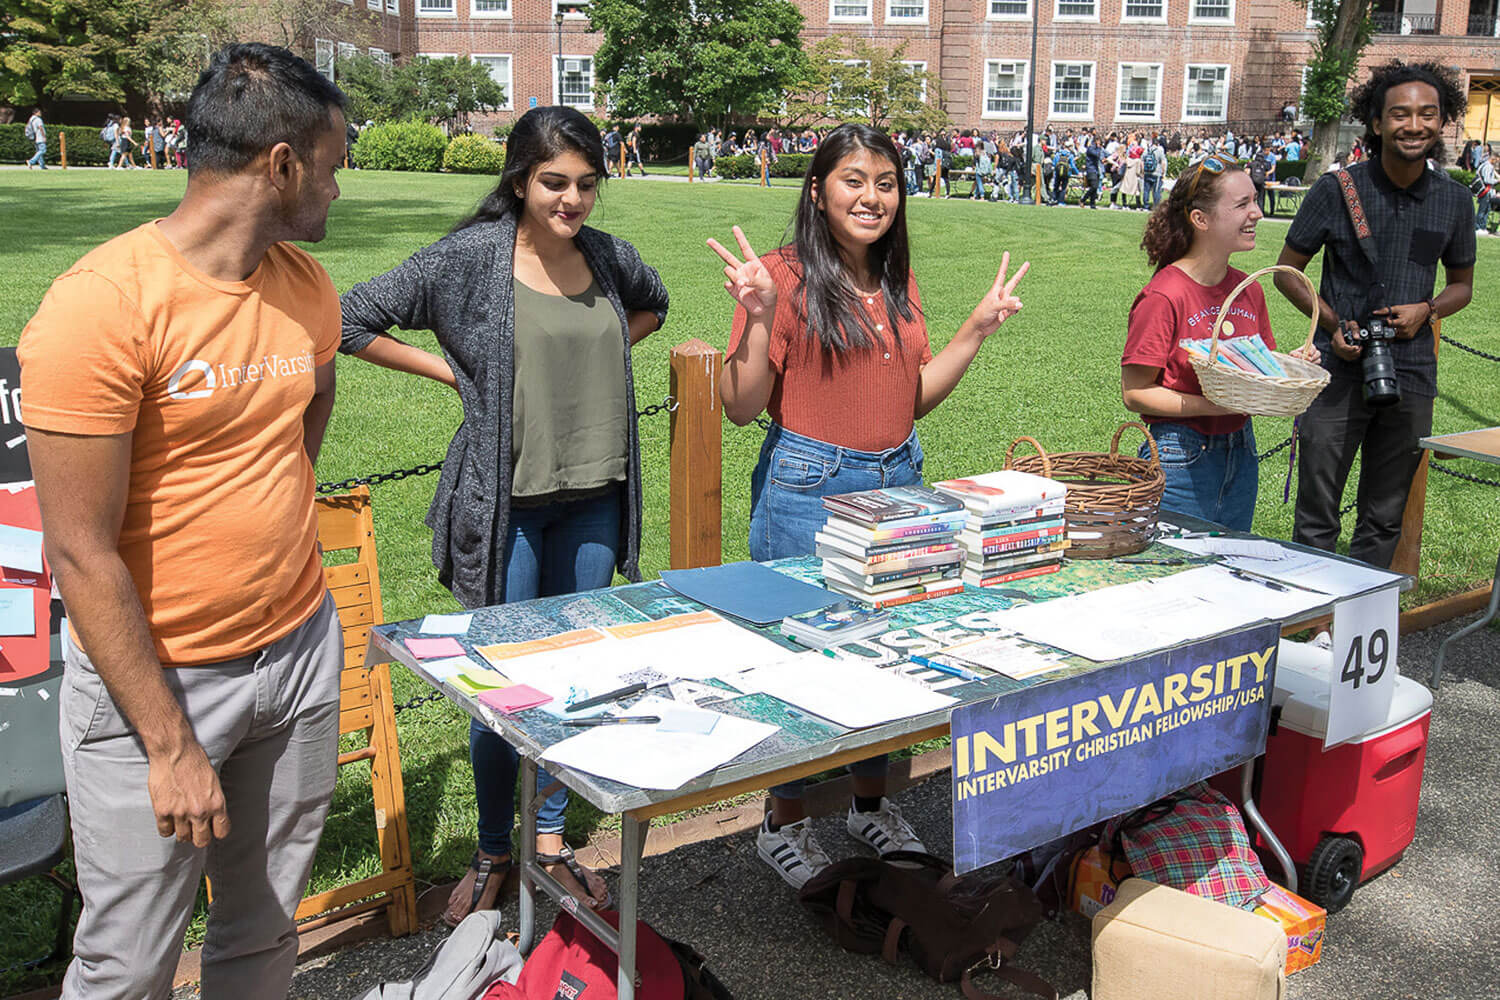 Students participate in the annual Involvement Fair held on campus each year to help welcome incoming freshman and transfer students.